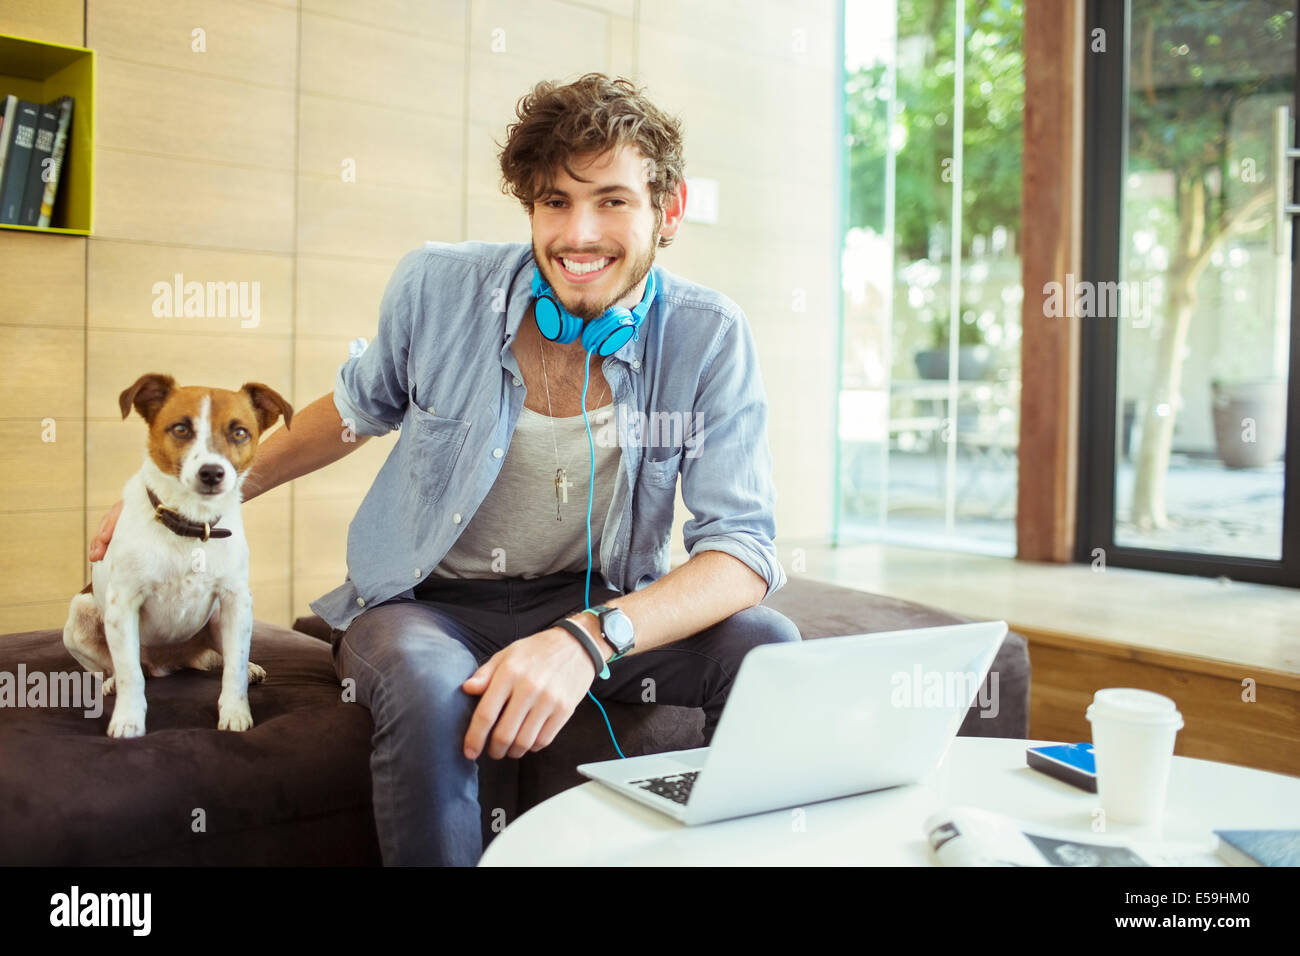 Man petting dog in office Banque D'Images